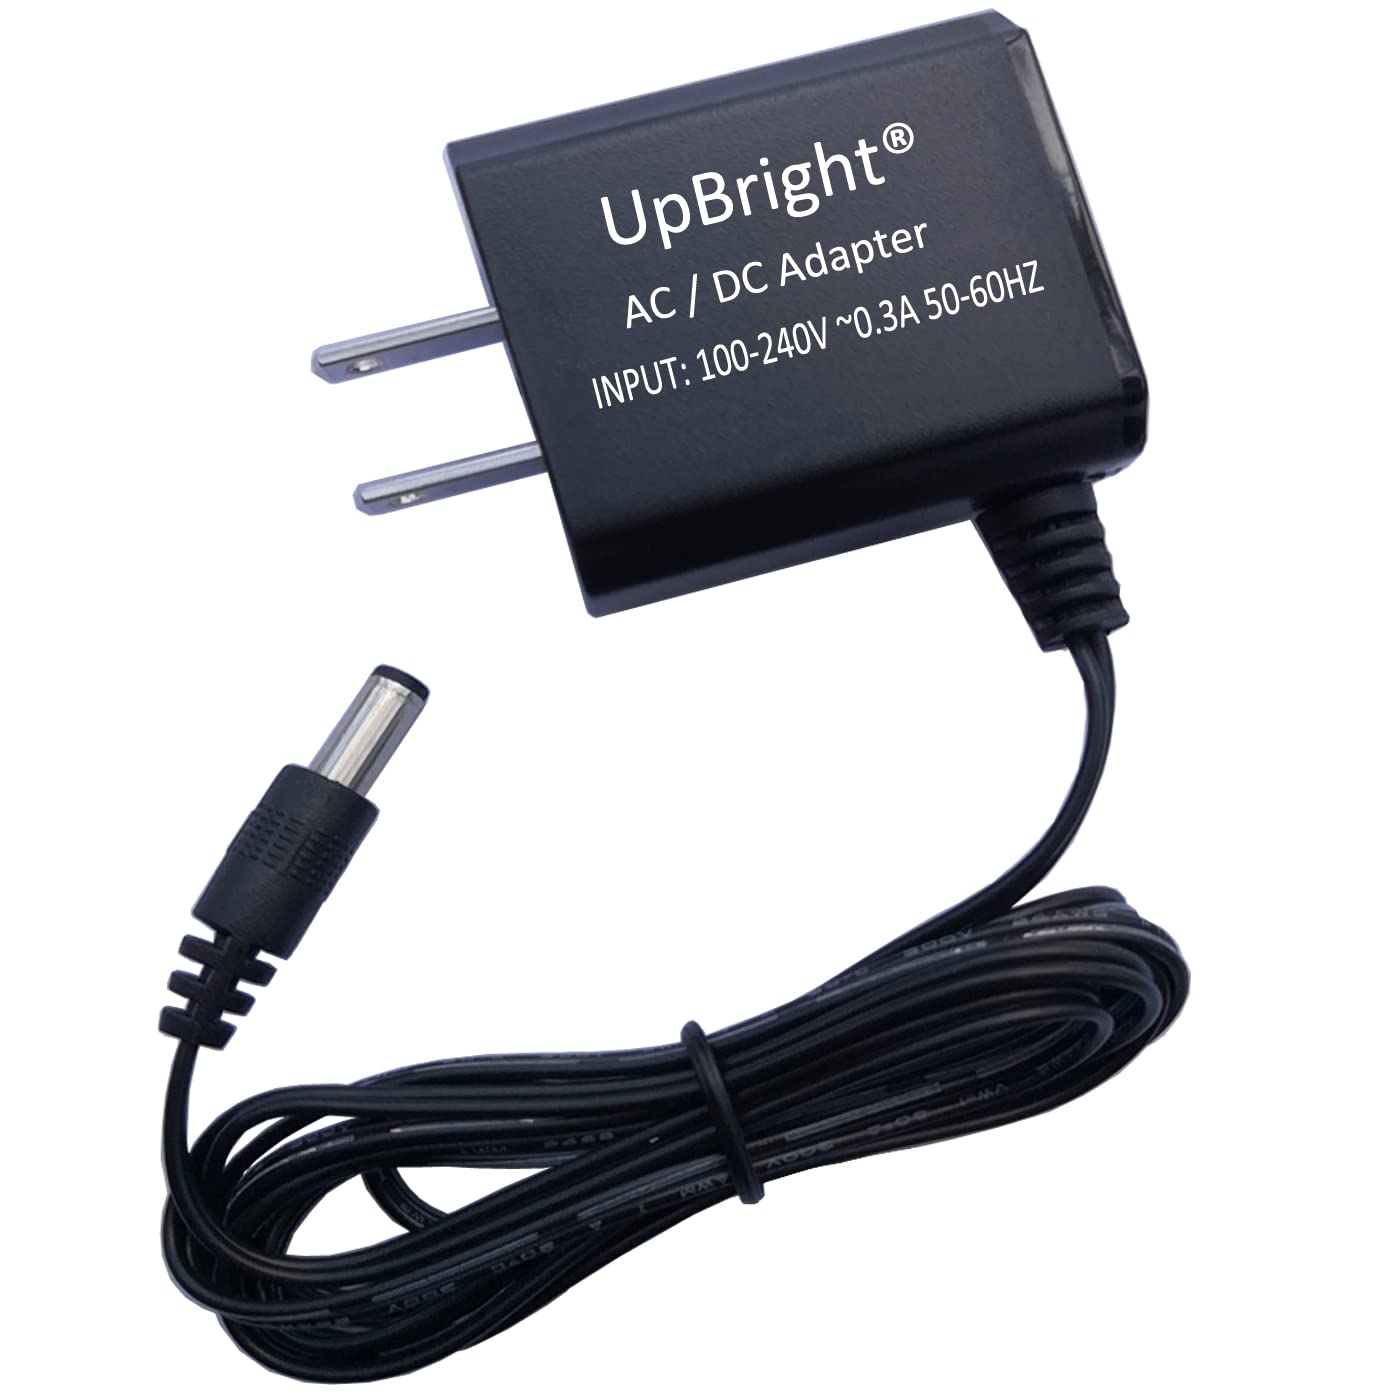 UpBright 5.5V AC Adapter Compatible with Homitt Model HM402A HM402 A Mini Cordless Power Scrubber Electric Spin Brush Shower Scrub & Clean DC 3.65V 18W Battery 1A Power Supply Cord Charger PSU(Barrel)